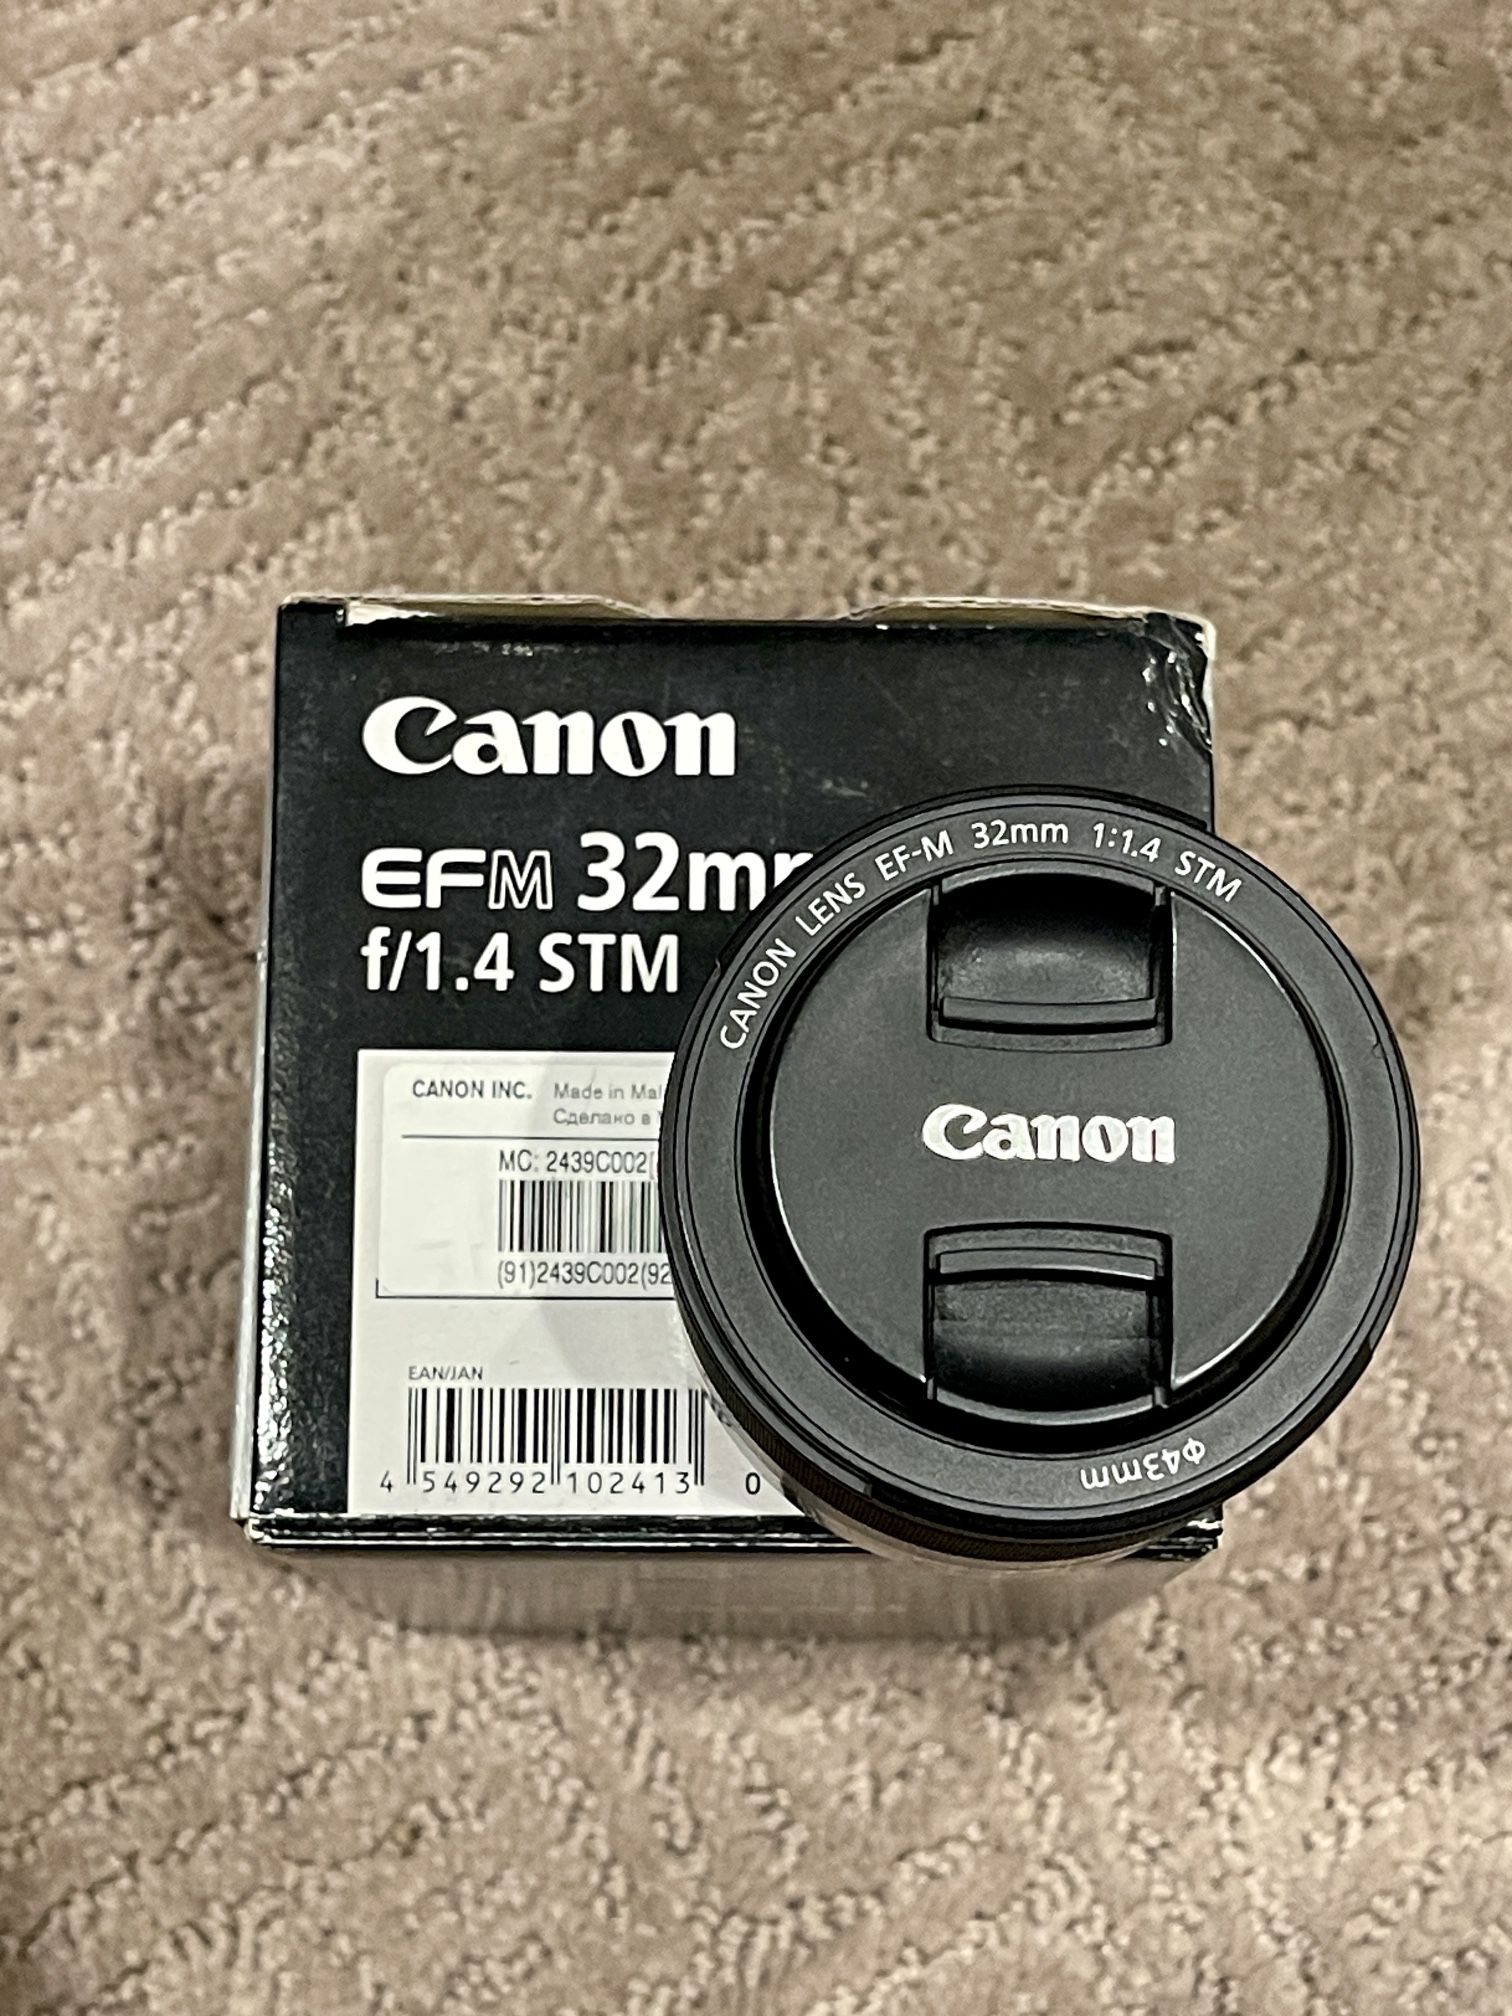 Canon EF-M 32mm f/1.4 STM Lens for Sale in Brea, CA OfferUp